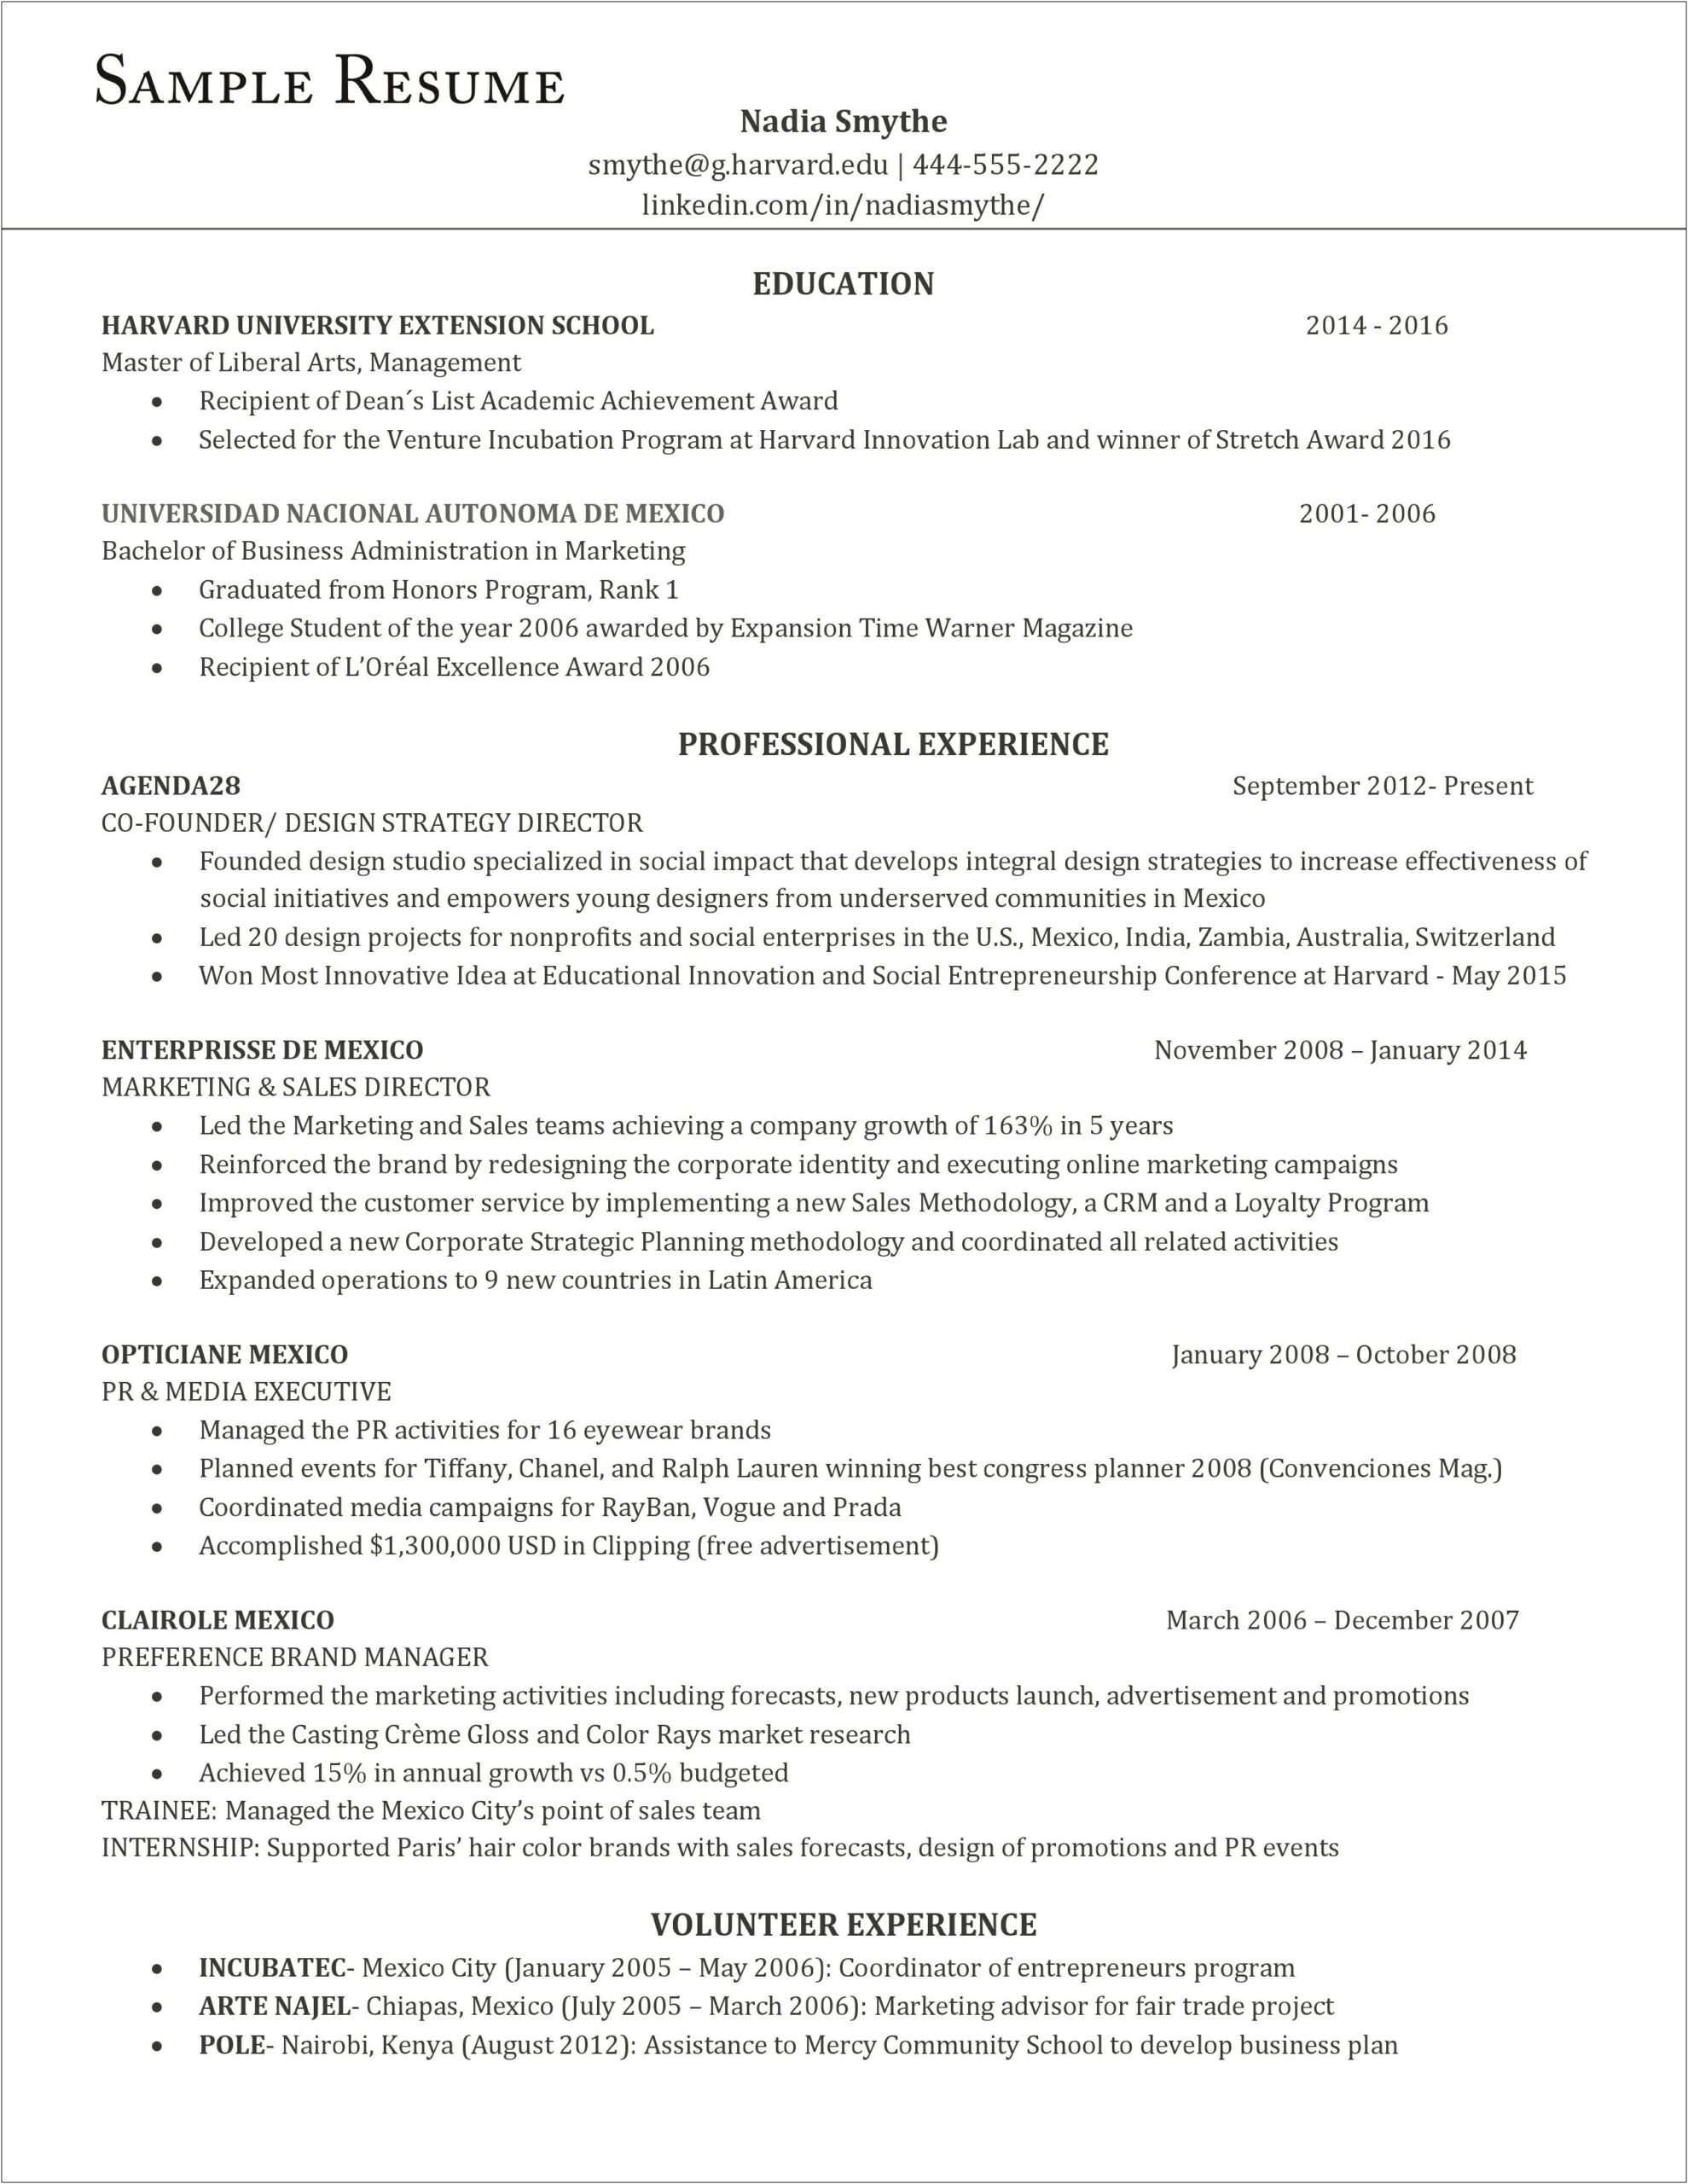 Resume Objective Ideas For Masters In Business Administration